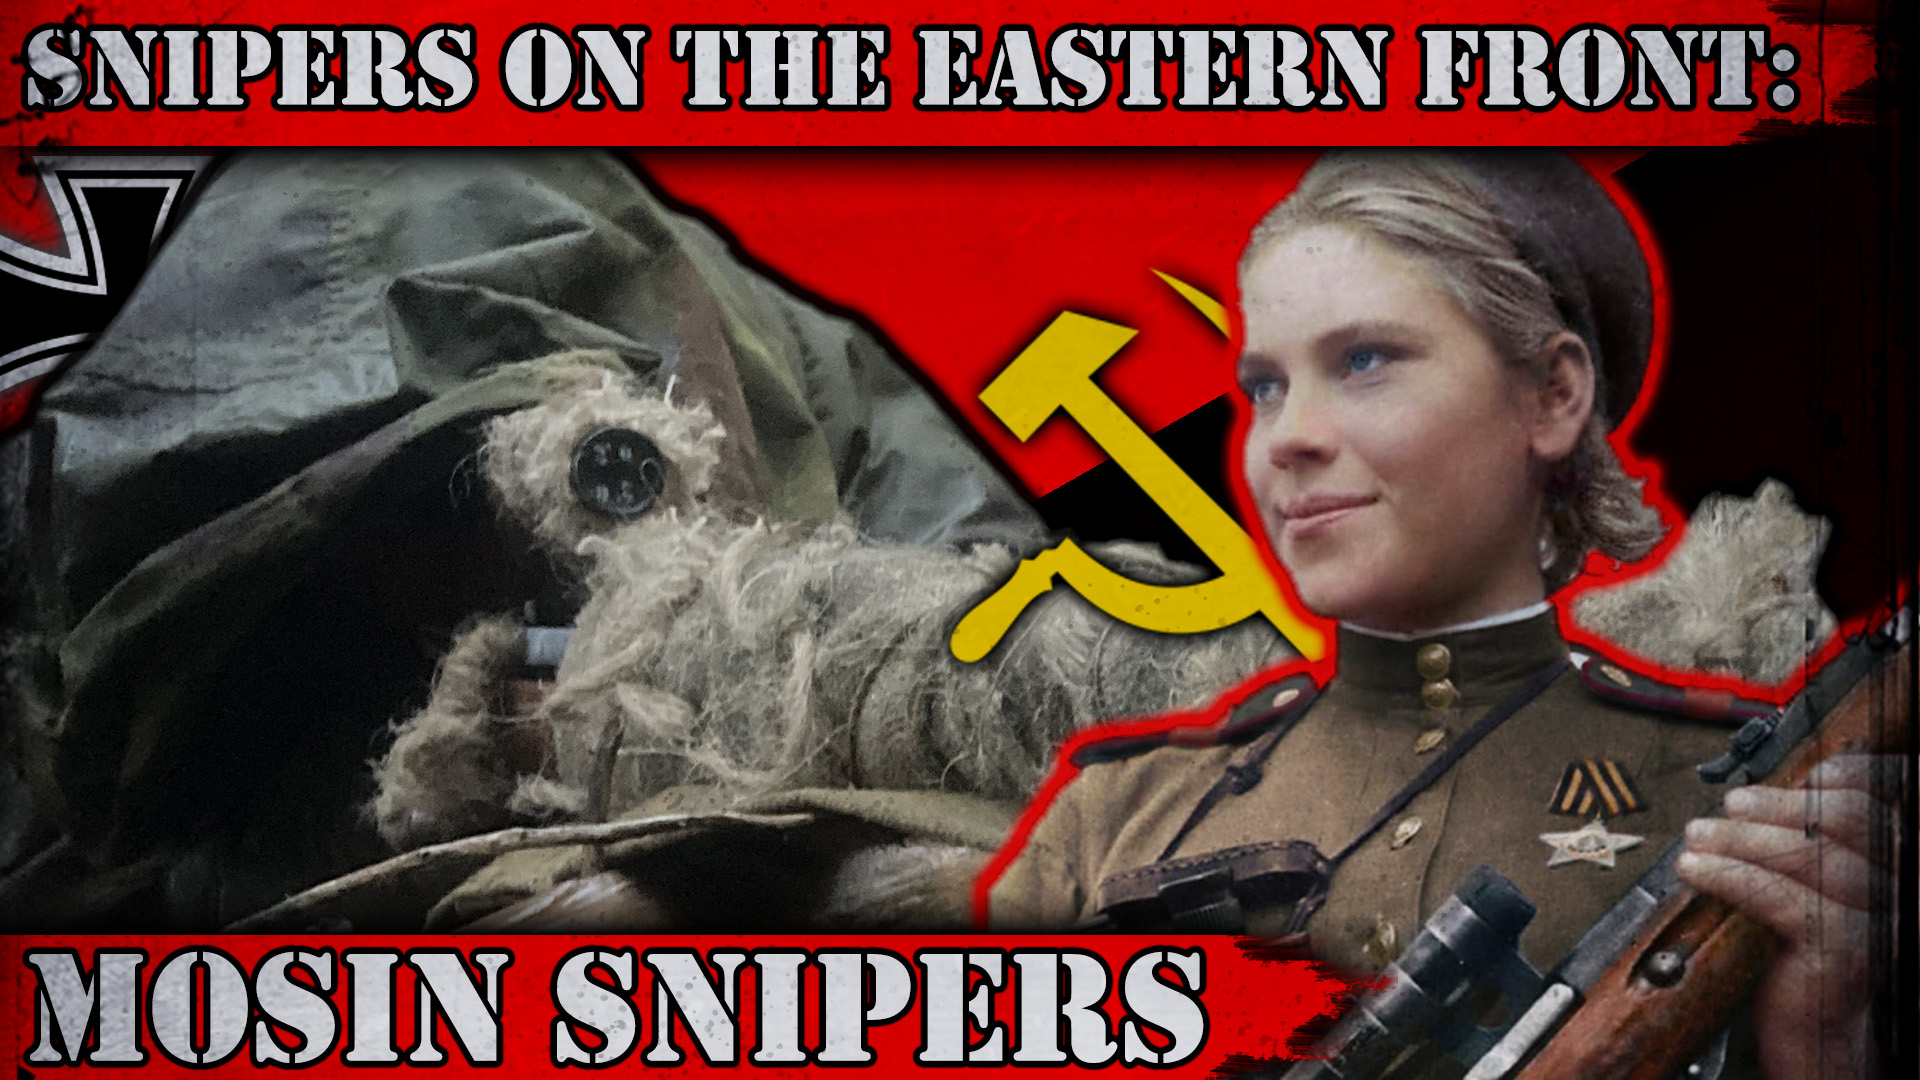 Snipers on the Eastern Front: Mosin Snipers!